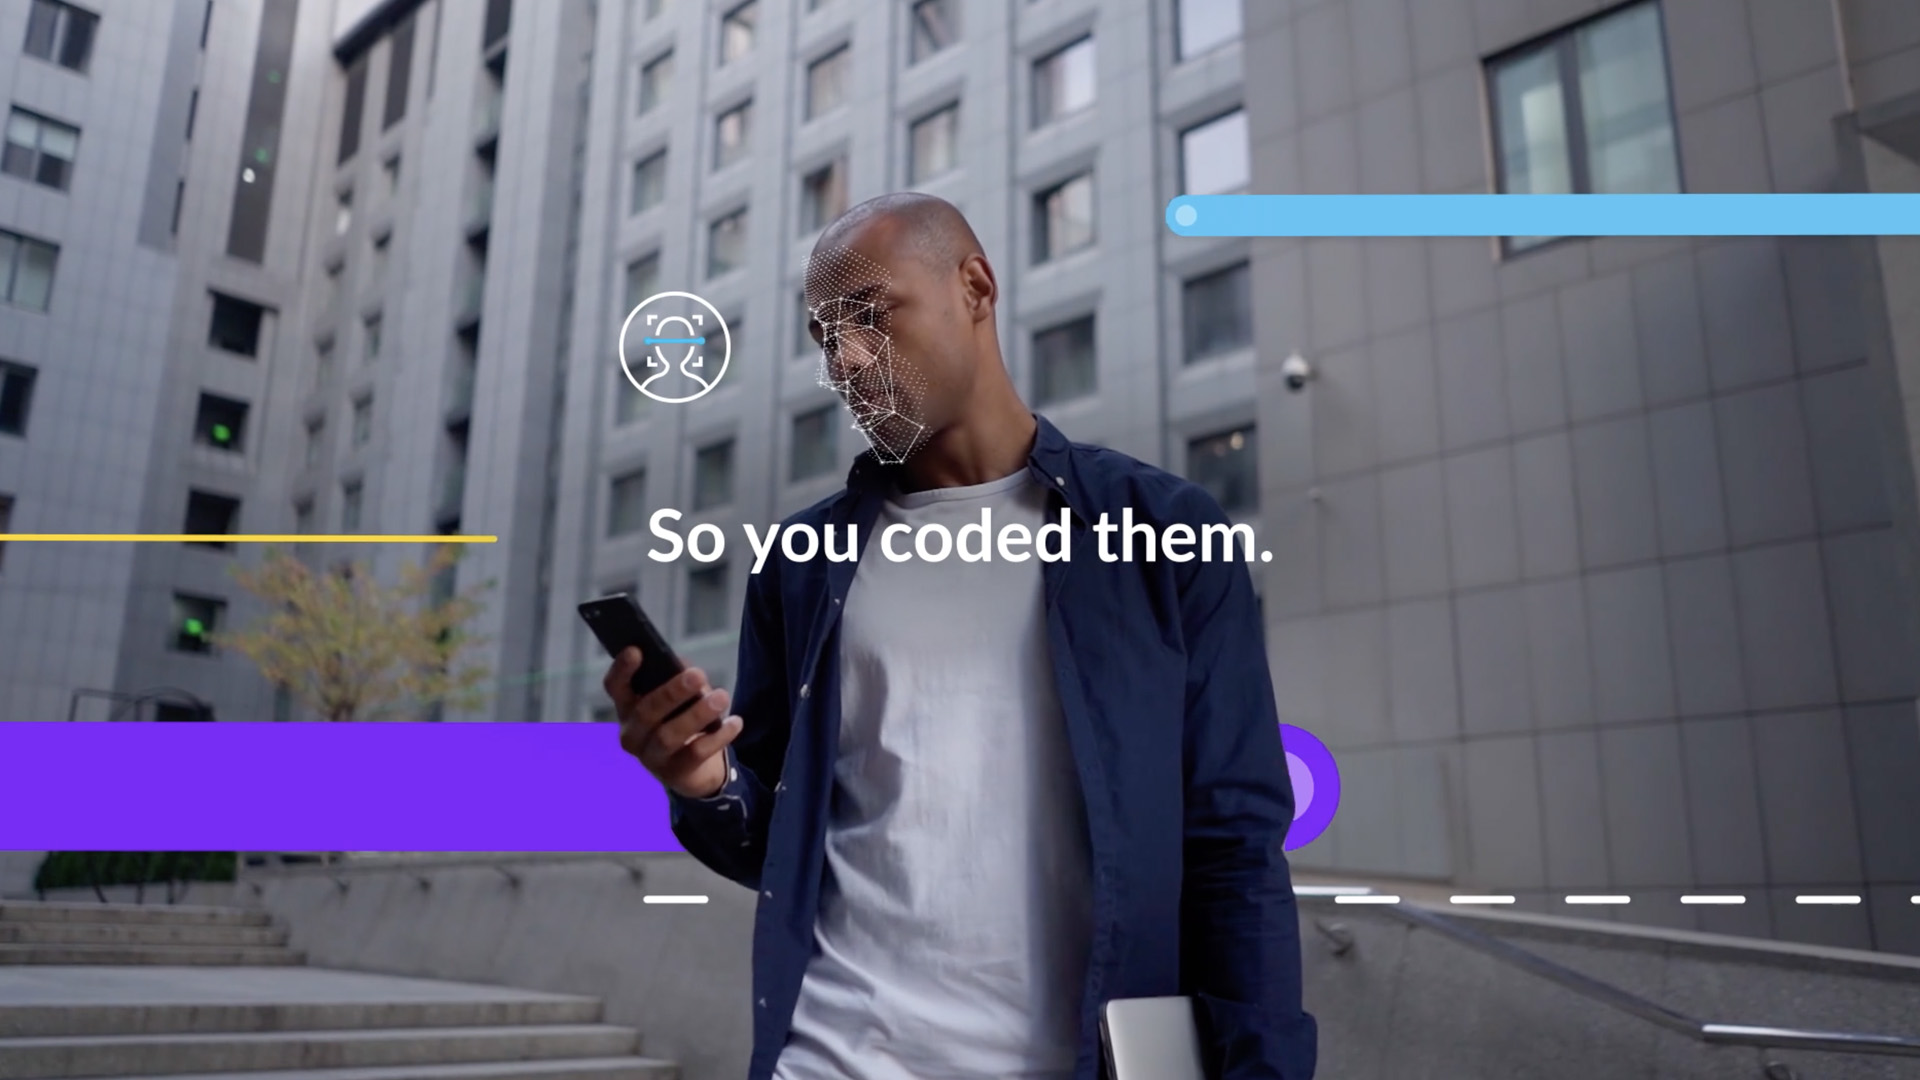 Still frame from the DevOps World event opener video that reads "so you coded them."